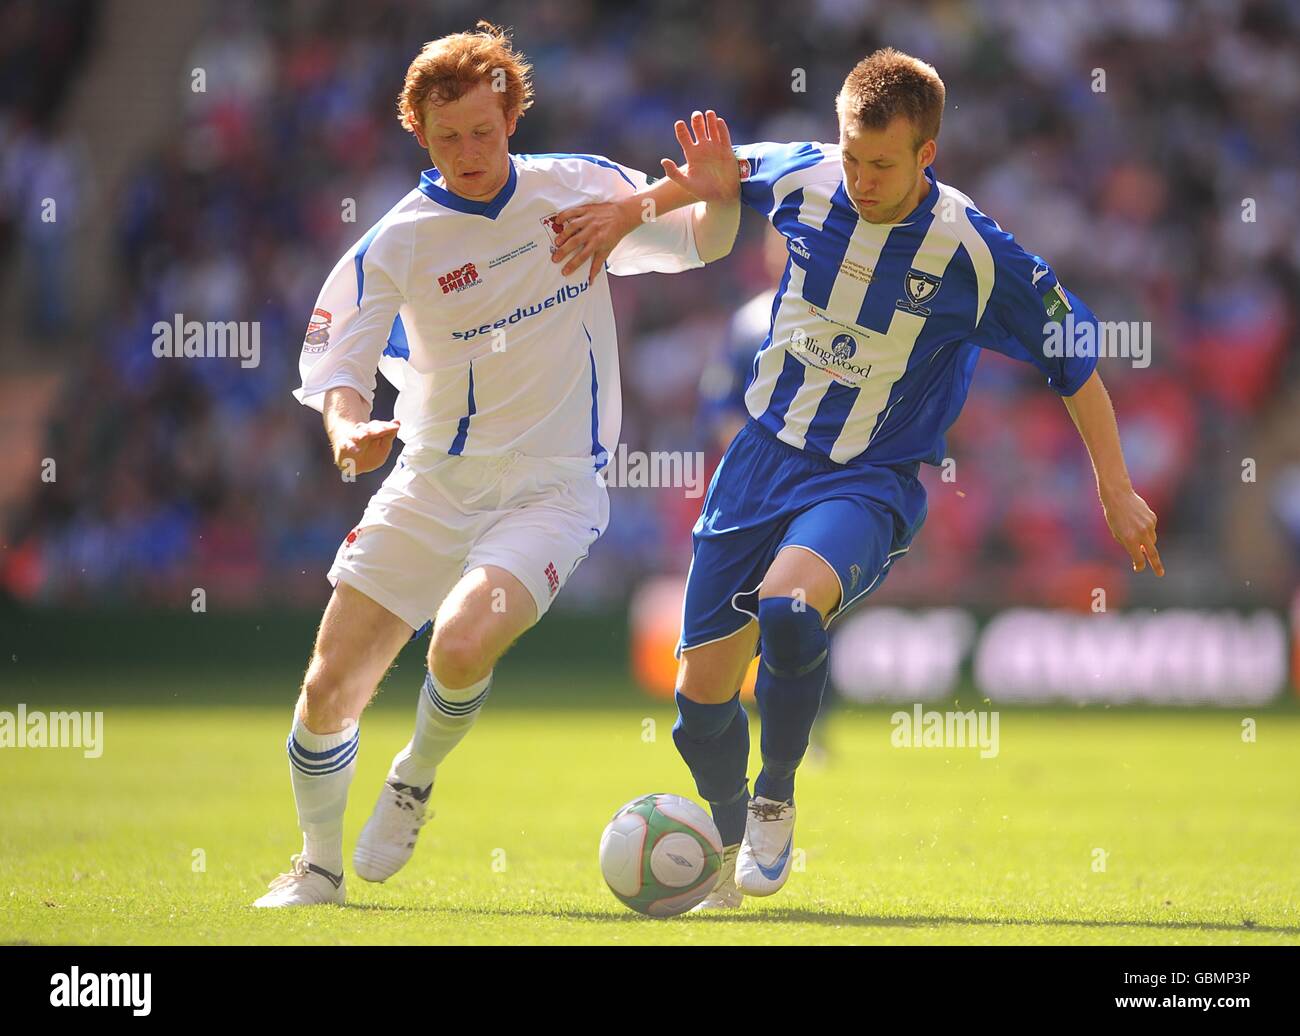 Glossop North End's Sam Hind (left) and Whiltey Bay's Chris Fawcett (right) in action Stock Photo